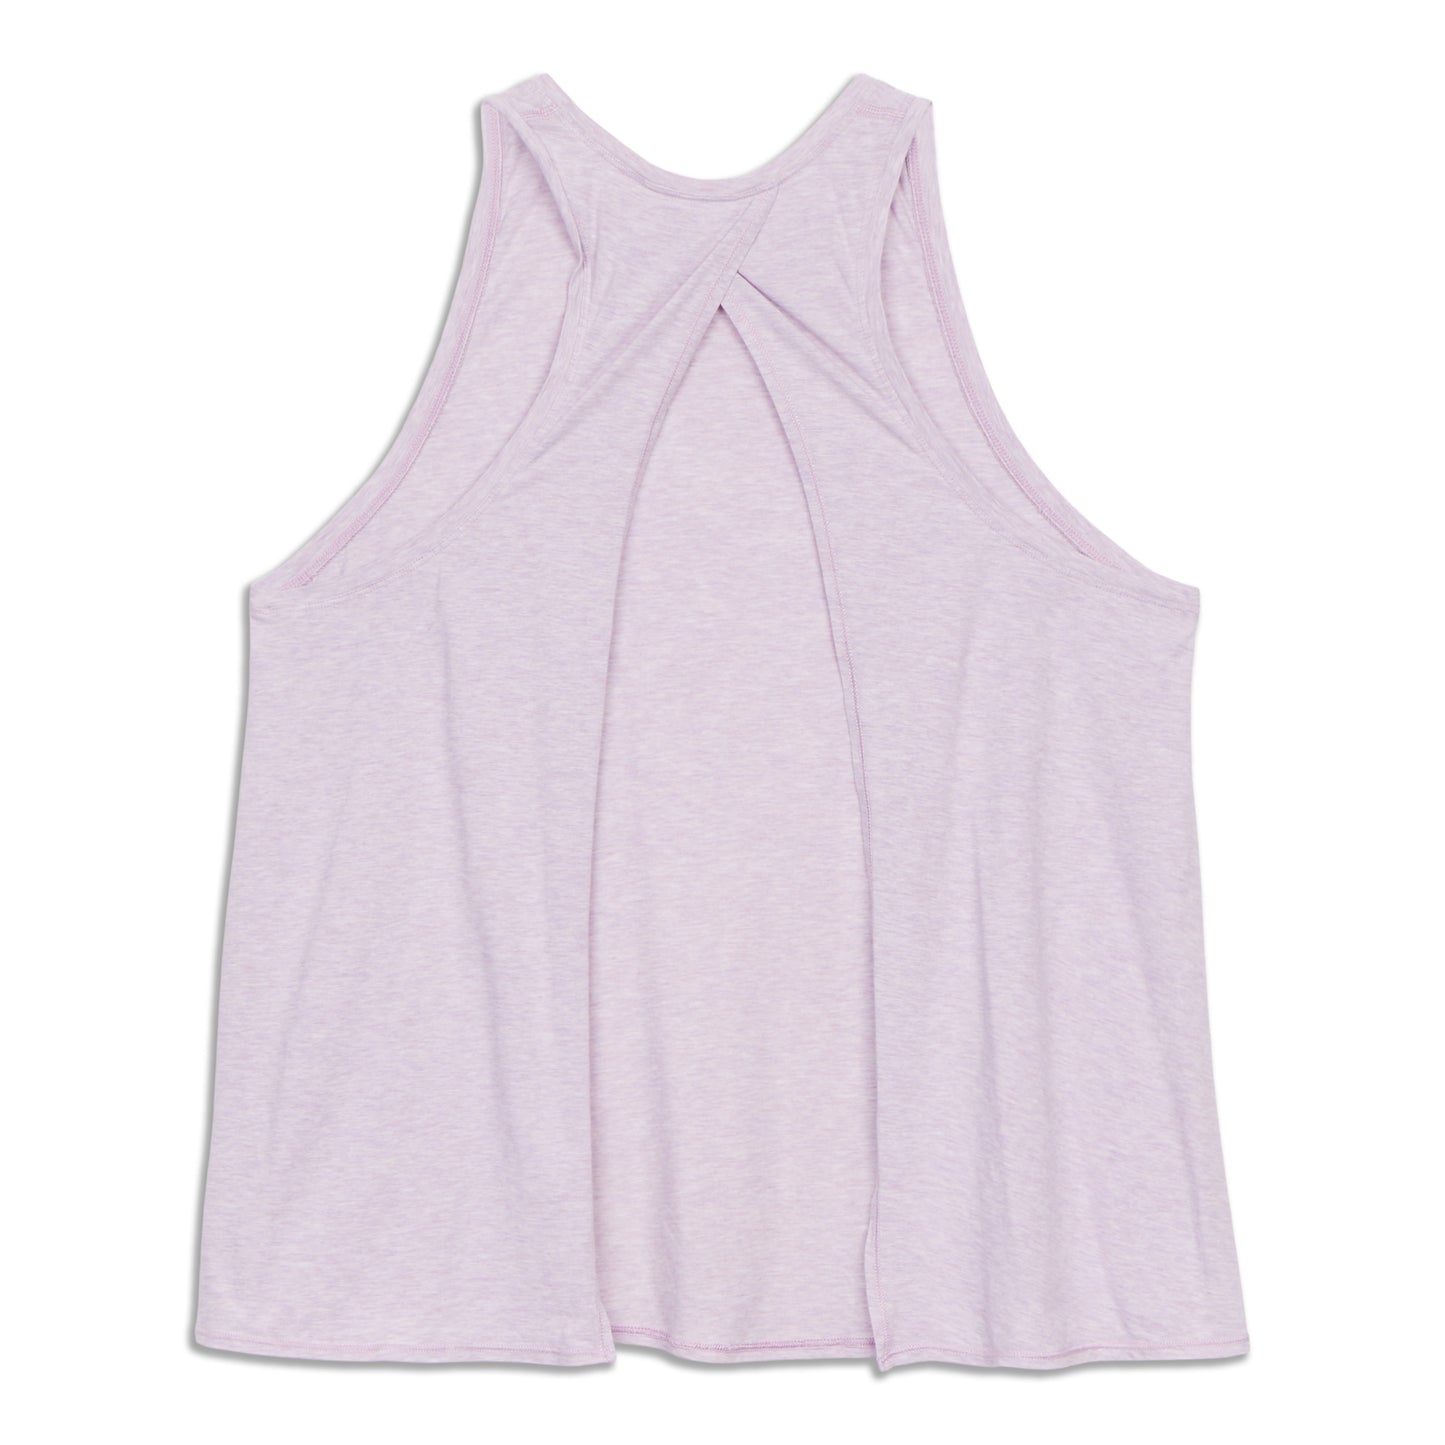 All Tied Up Tank Top - Resale